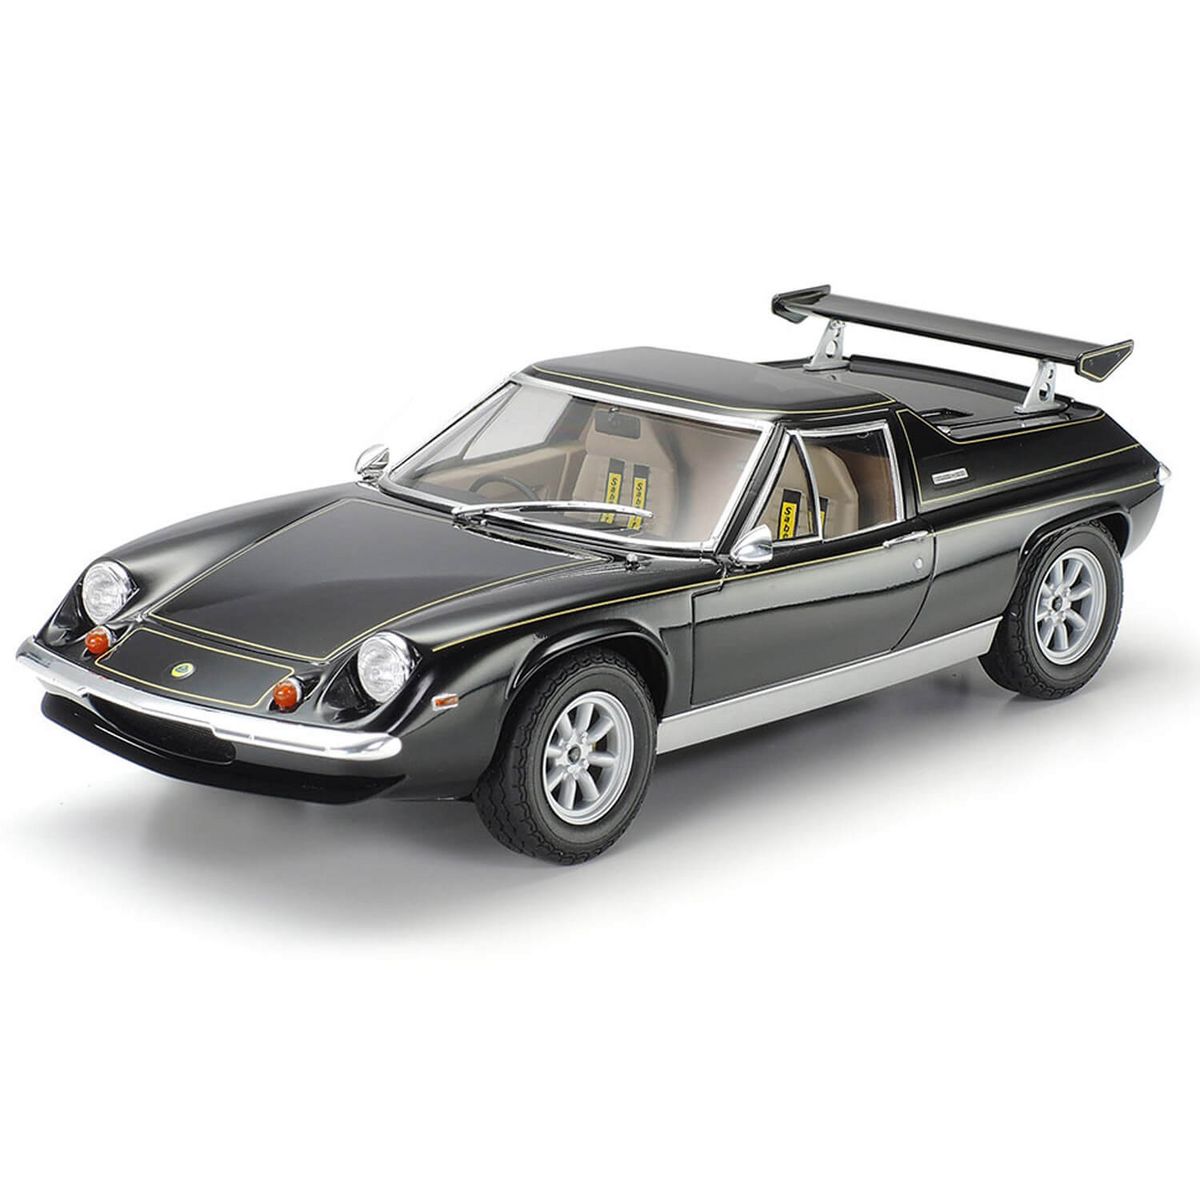 Tamiya Maquette voiture : Lotus Europa Special